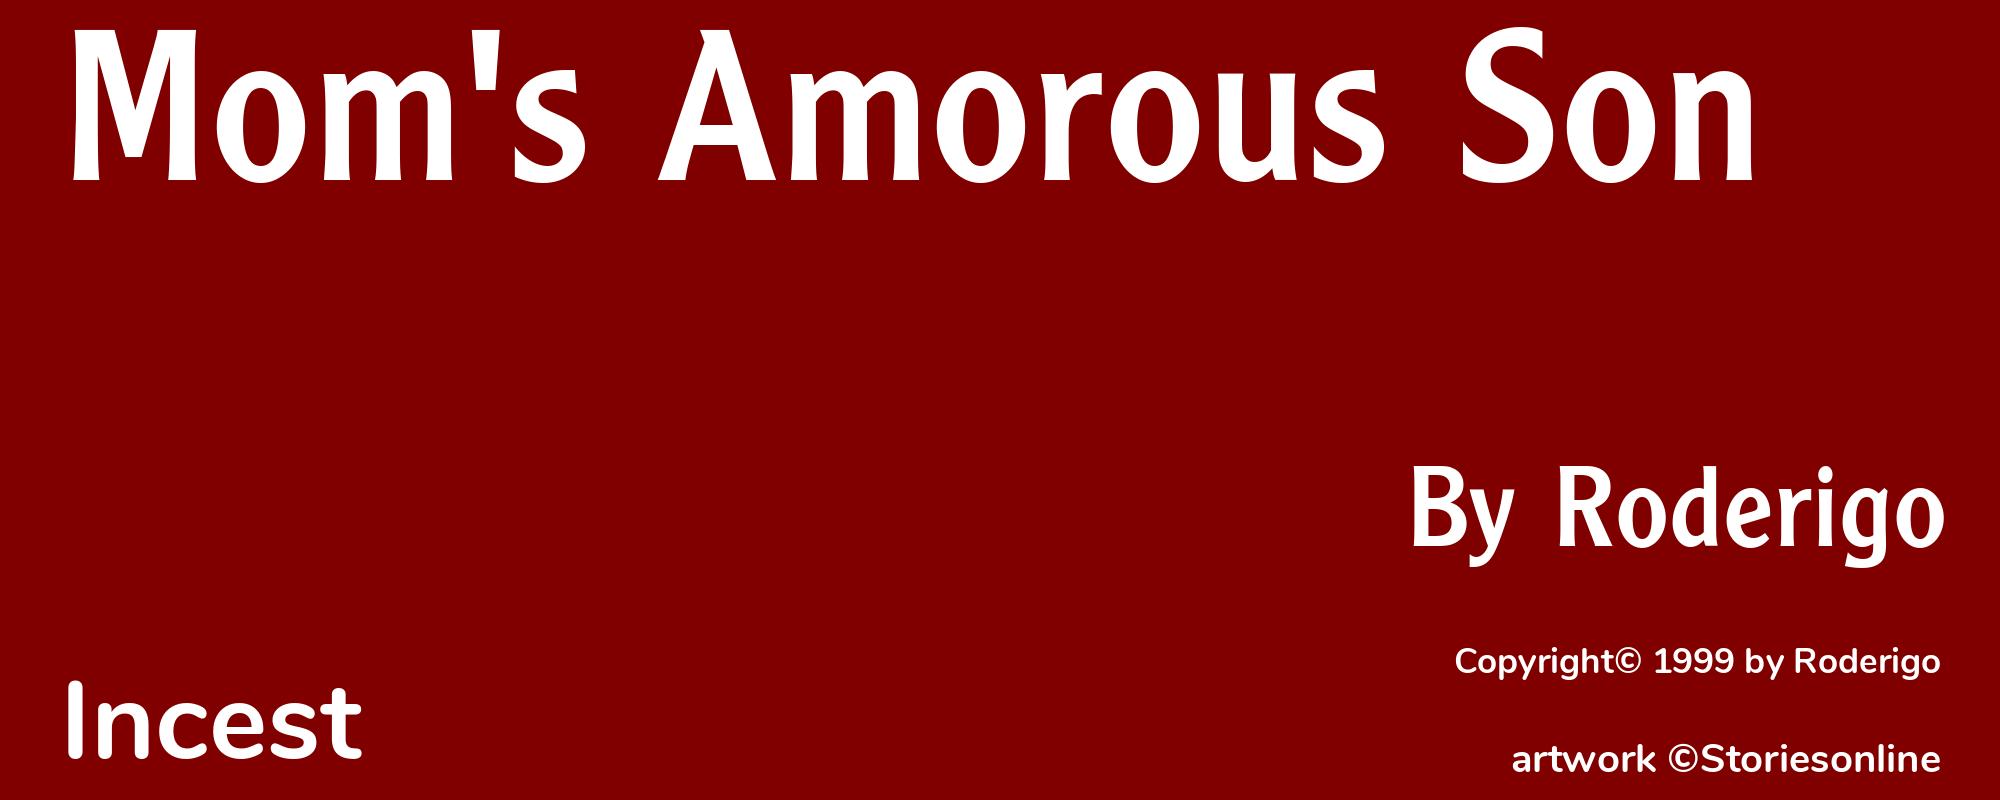 Mom's Amorous Son - Cover